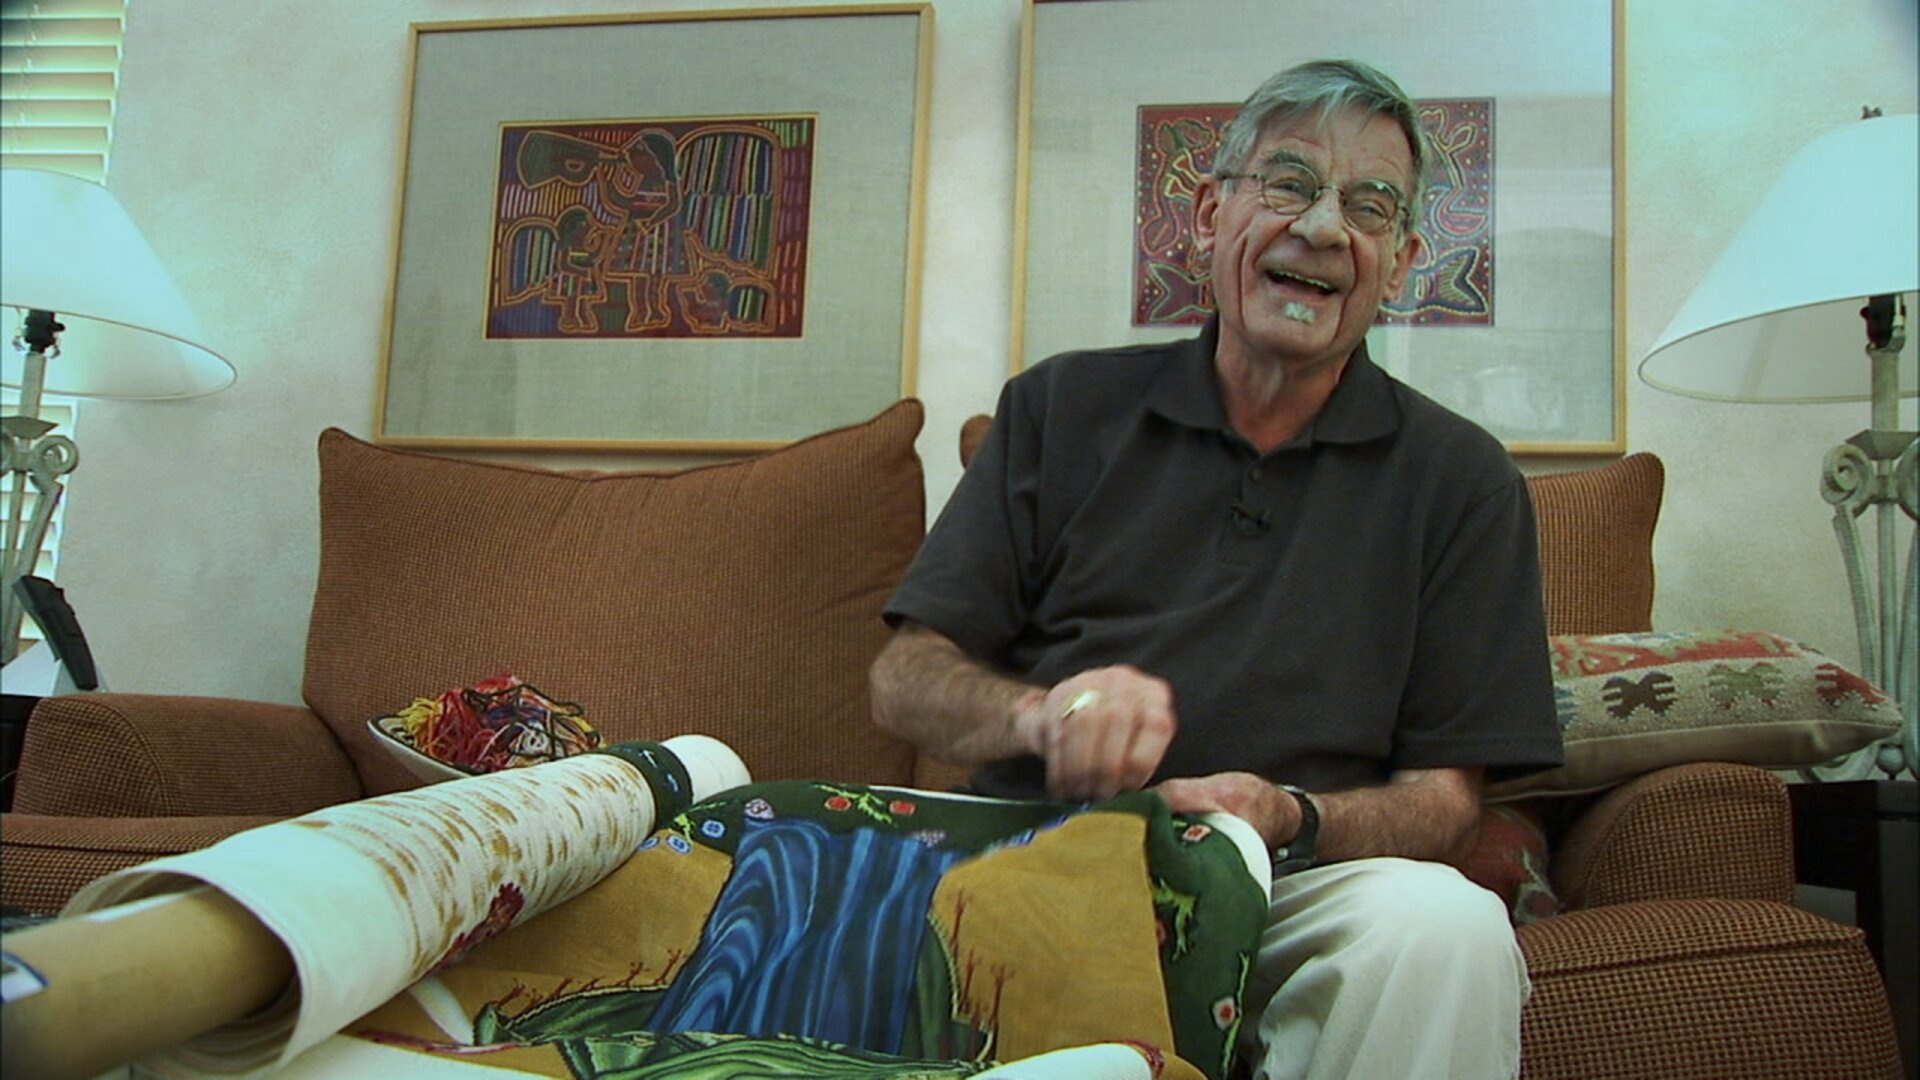 Richard Sipe at home in La Jolla, California, working on his tapestry of Torcello's Last Judgment. Still from Sipe: Sex, Lies, and the Priesthood